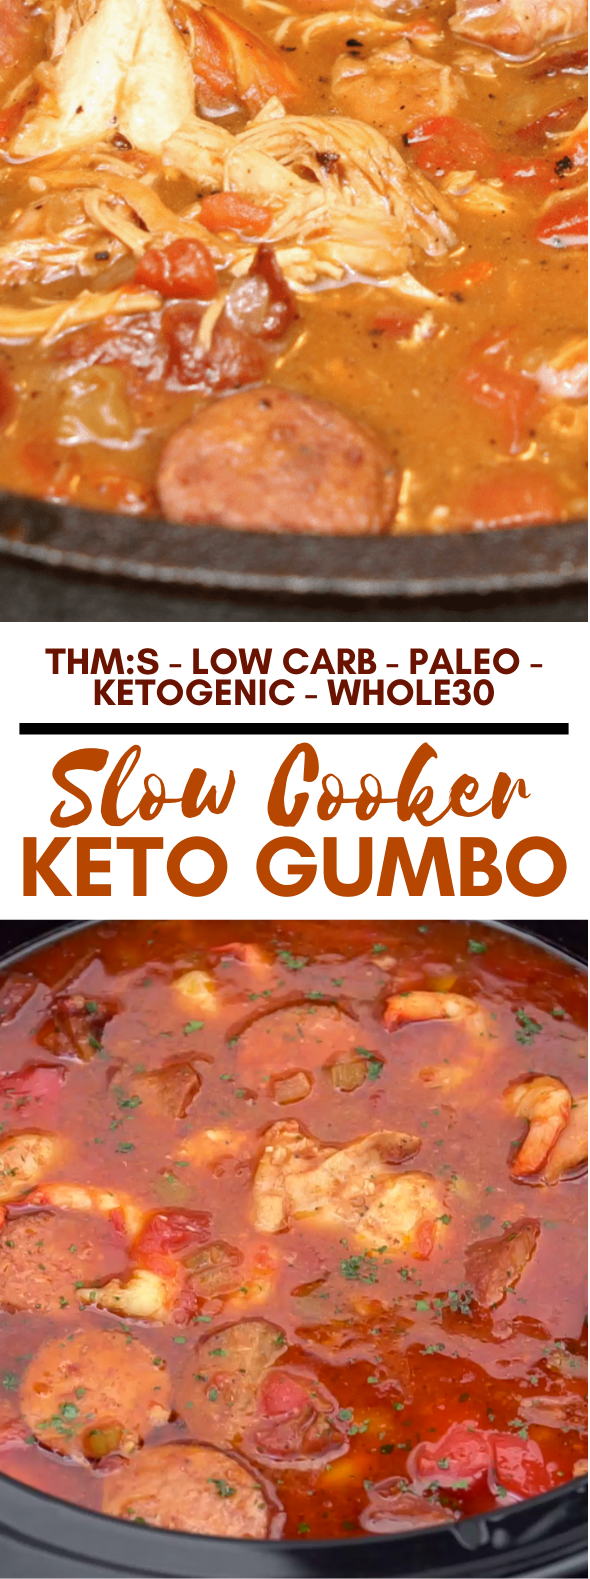 Keto Gumbo (Slow Cooker, THM:S, Low Carb, Paleo, Ketogenic, Whole30) #healthy #diet